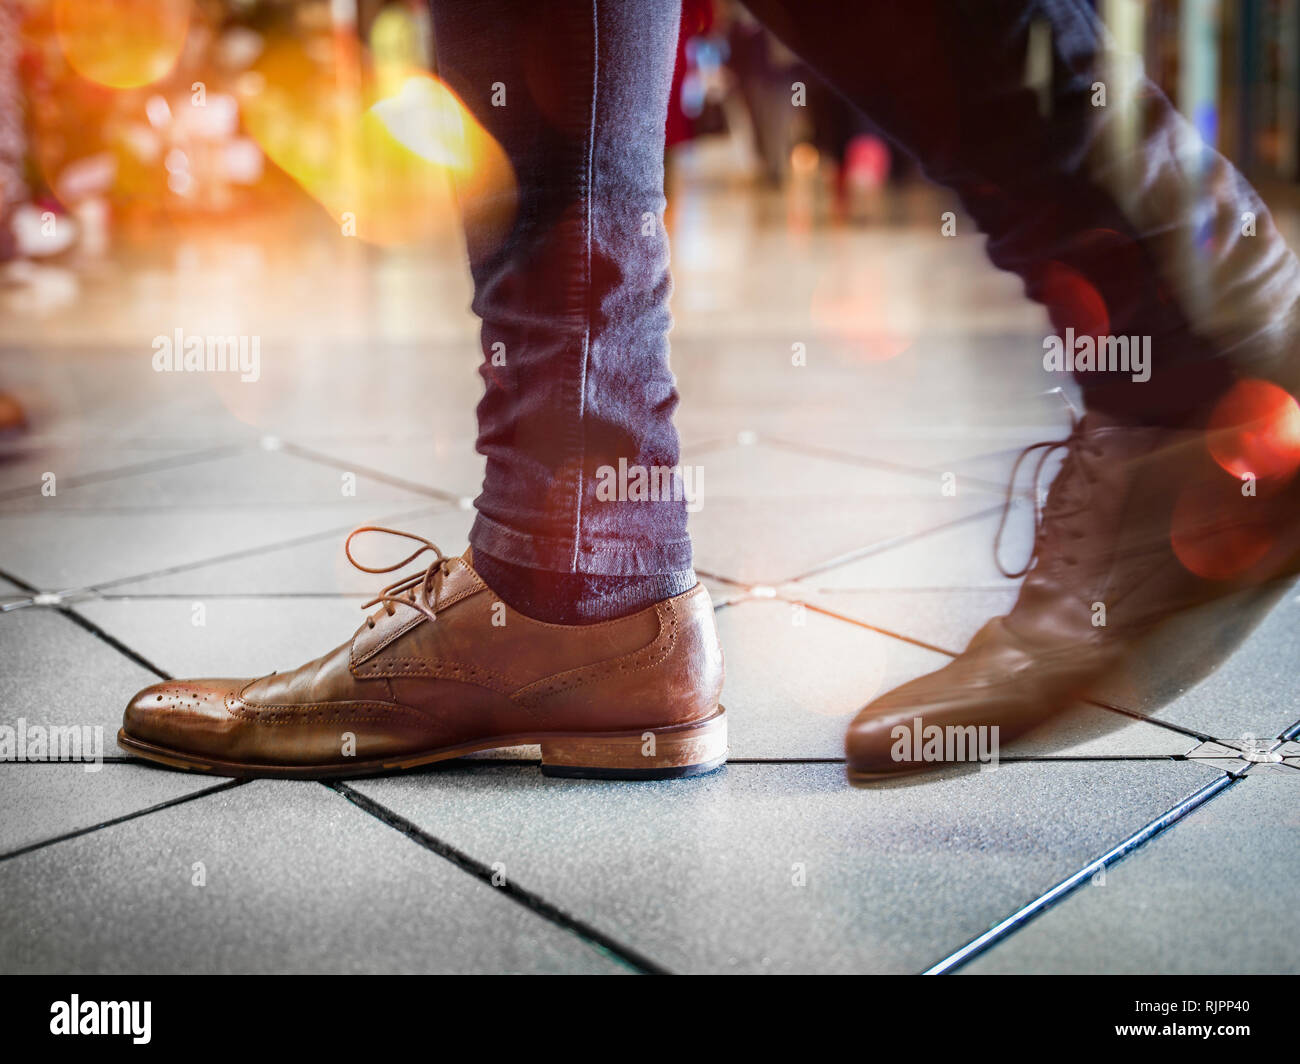 Feet in pair of brogues on tiled flooring Stock Photo